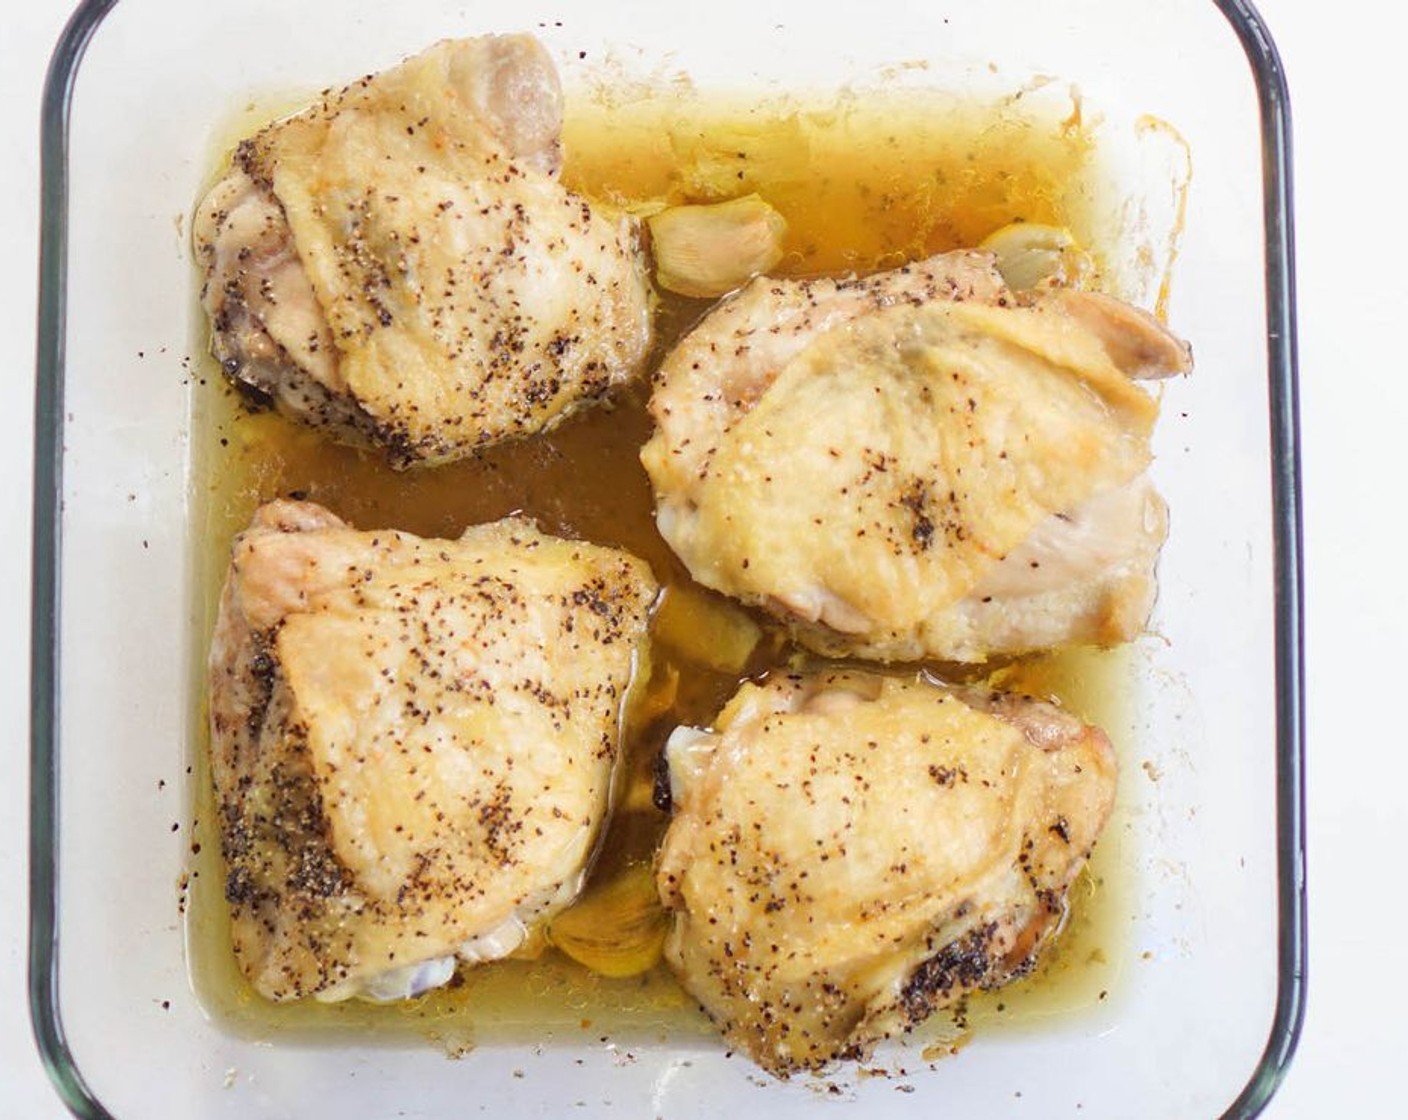 step 2 Wash and dry the Bone-in, Skin-on Chicken Thighs (4). Rub with Olive Oil (3 Tbsp) and sprinkle with Salt (to taste) and Ground Black Pepper (to taste). Place in roasting pan with Garlic (3 cloves) and bake 30 minutes.